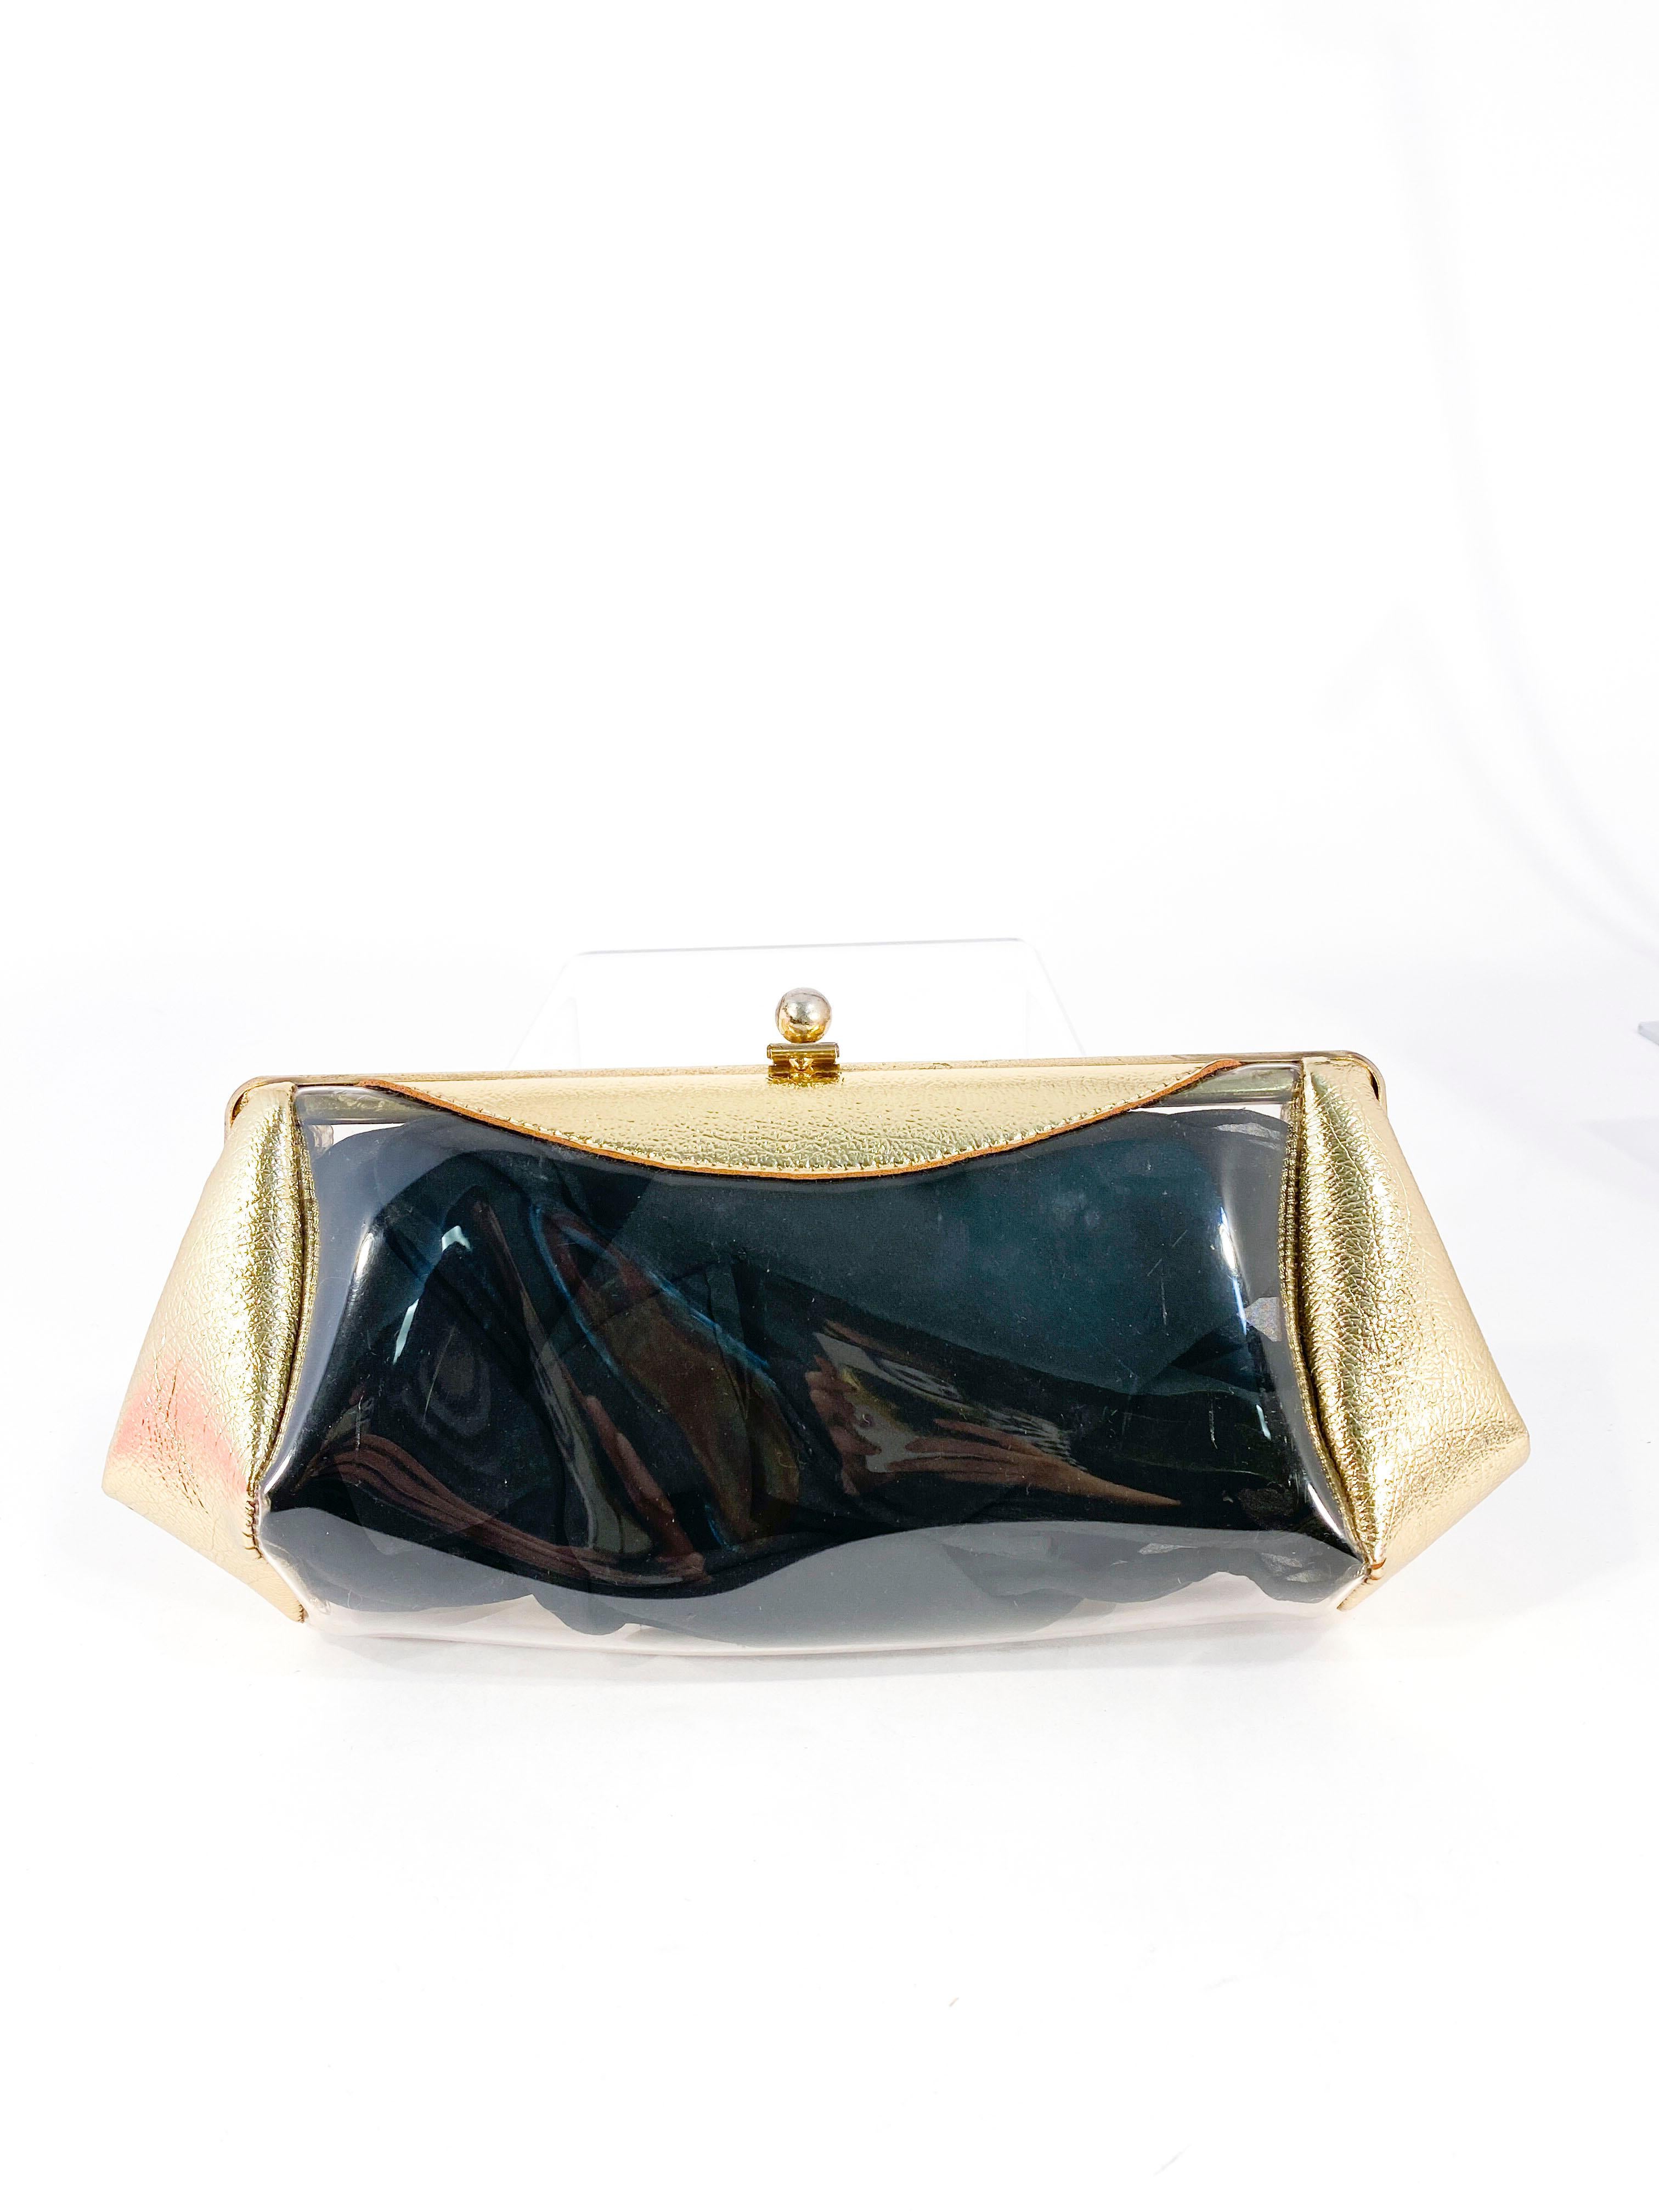 1950s metallic gold leatherette and clear plastic vinyl evening clutch with bras frame. The interior can be interchangeable with colored scarfs to match an evening gown (examples shown but only black scarf is sold with the clutch). 